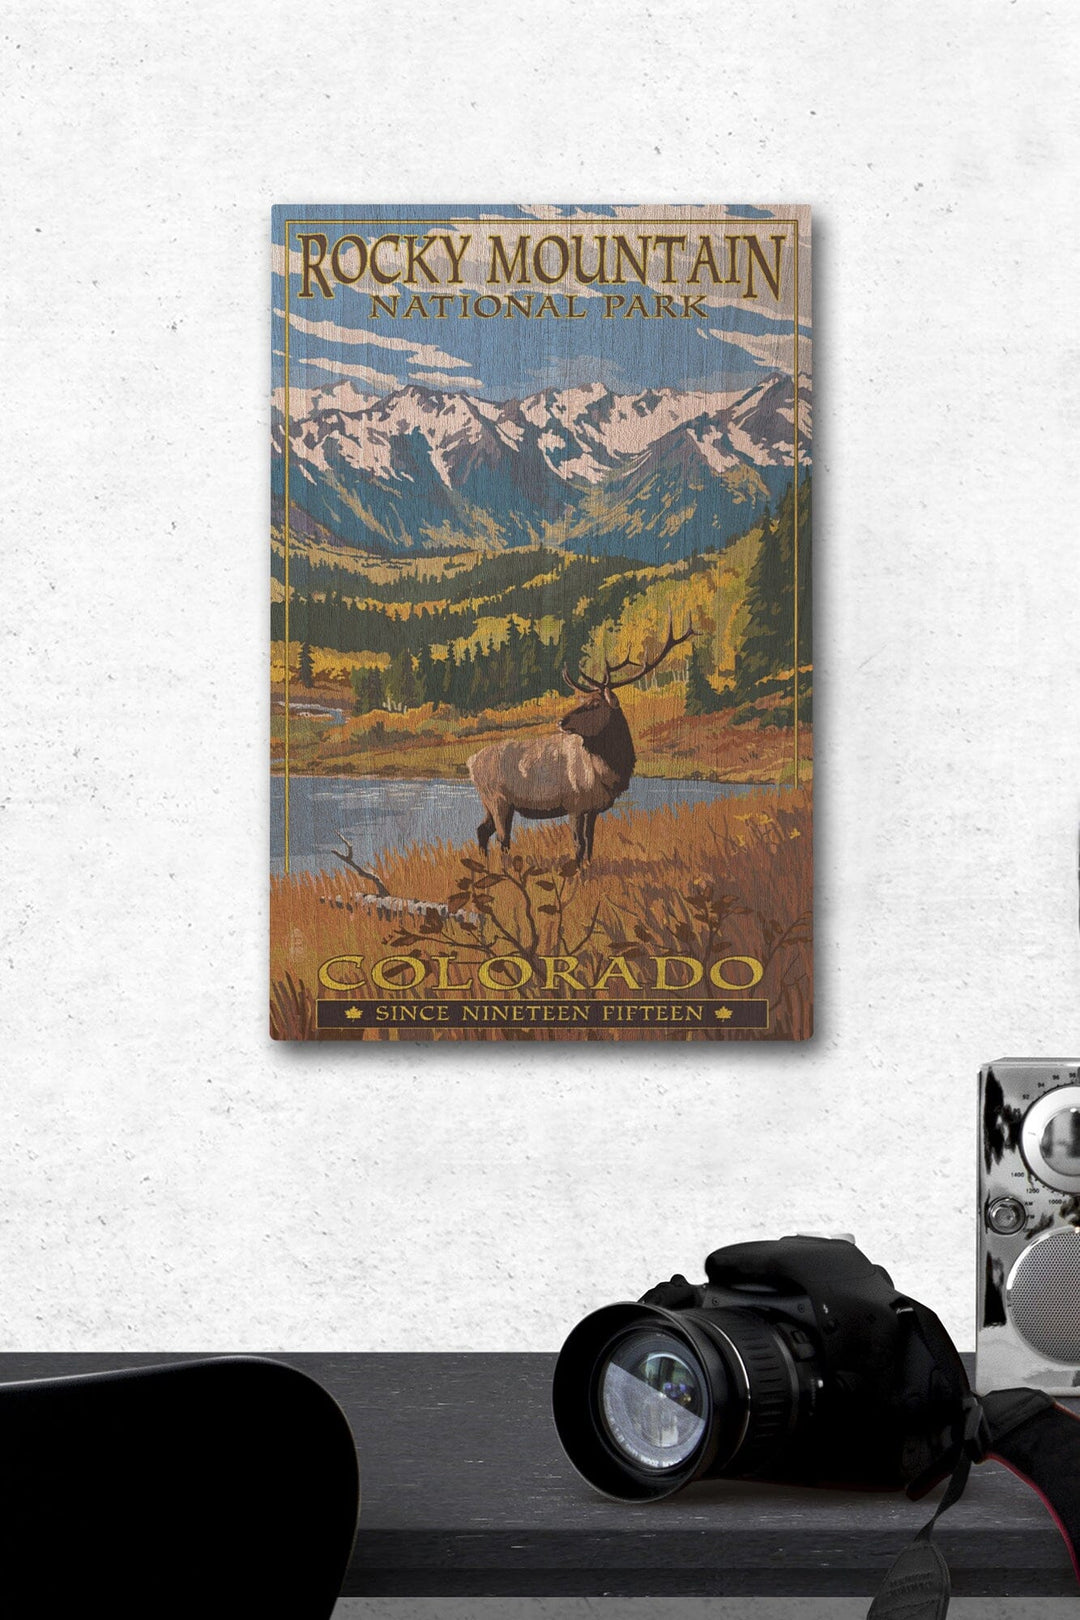 Rocky Mountain National Park, Colorado, Fall and Elk, Lantern Press Artwork, Wood Signs and Postcards Wood Lantern Press 12 x 18 Wood Gallery Print 